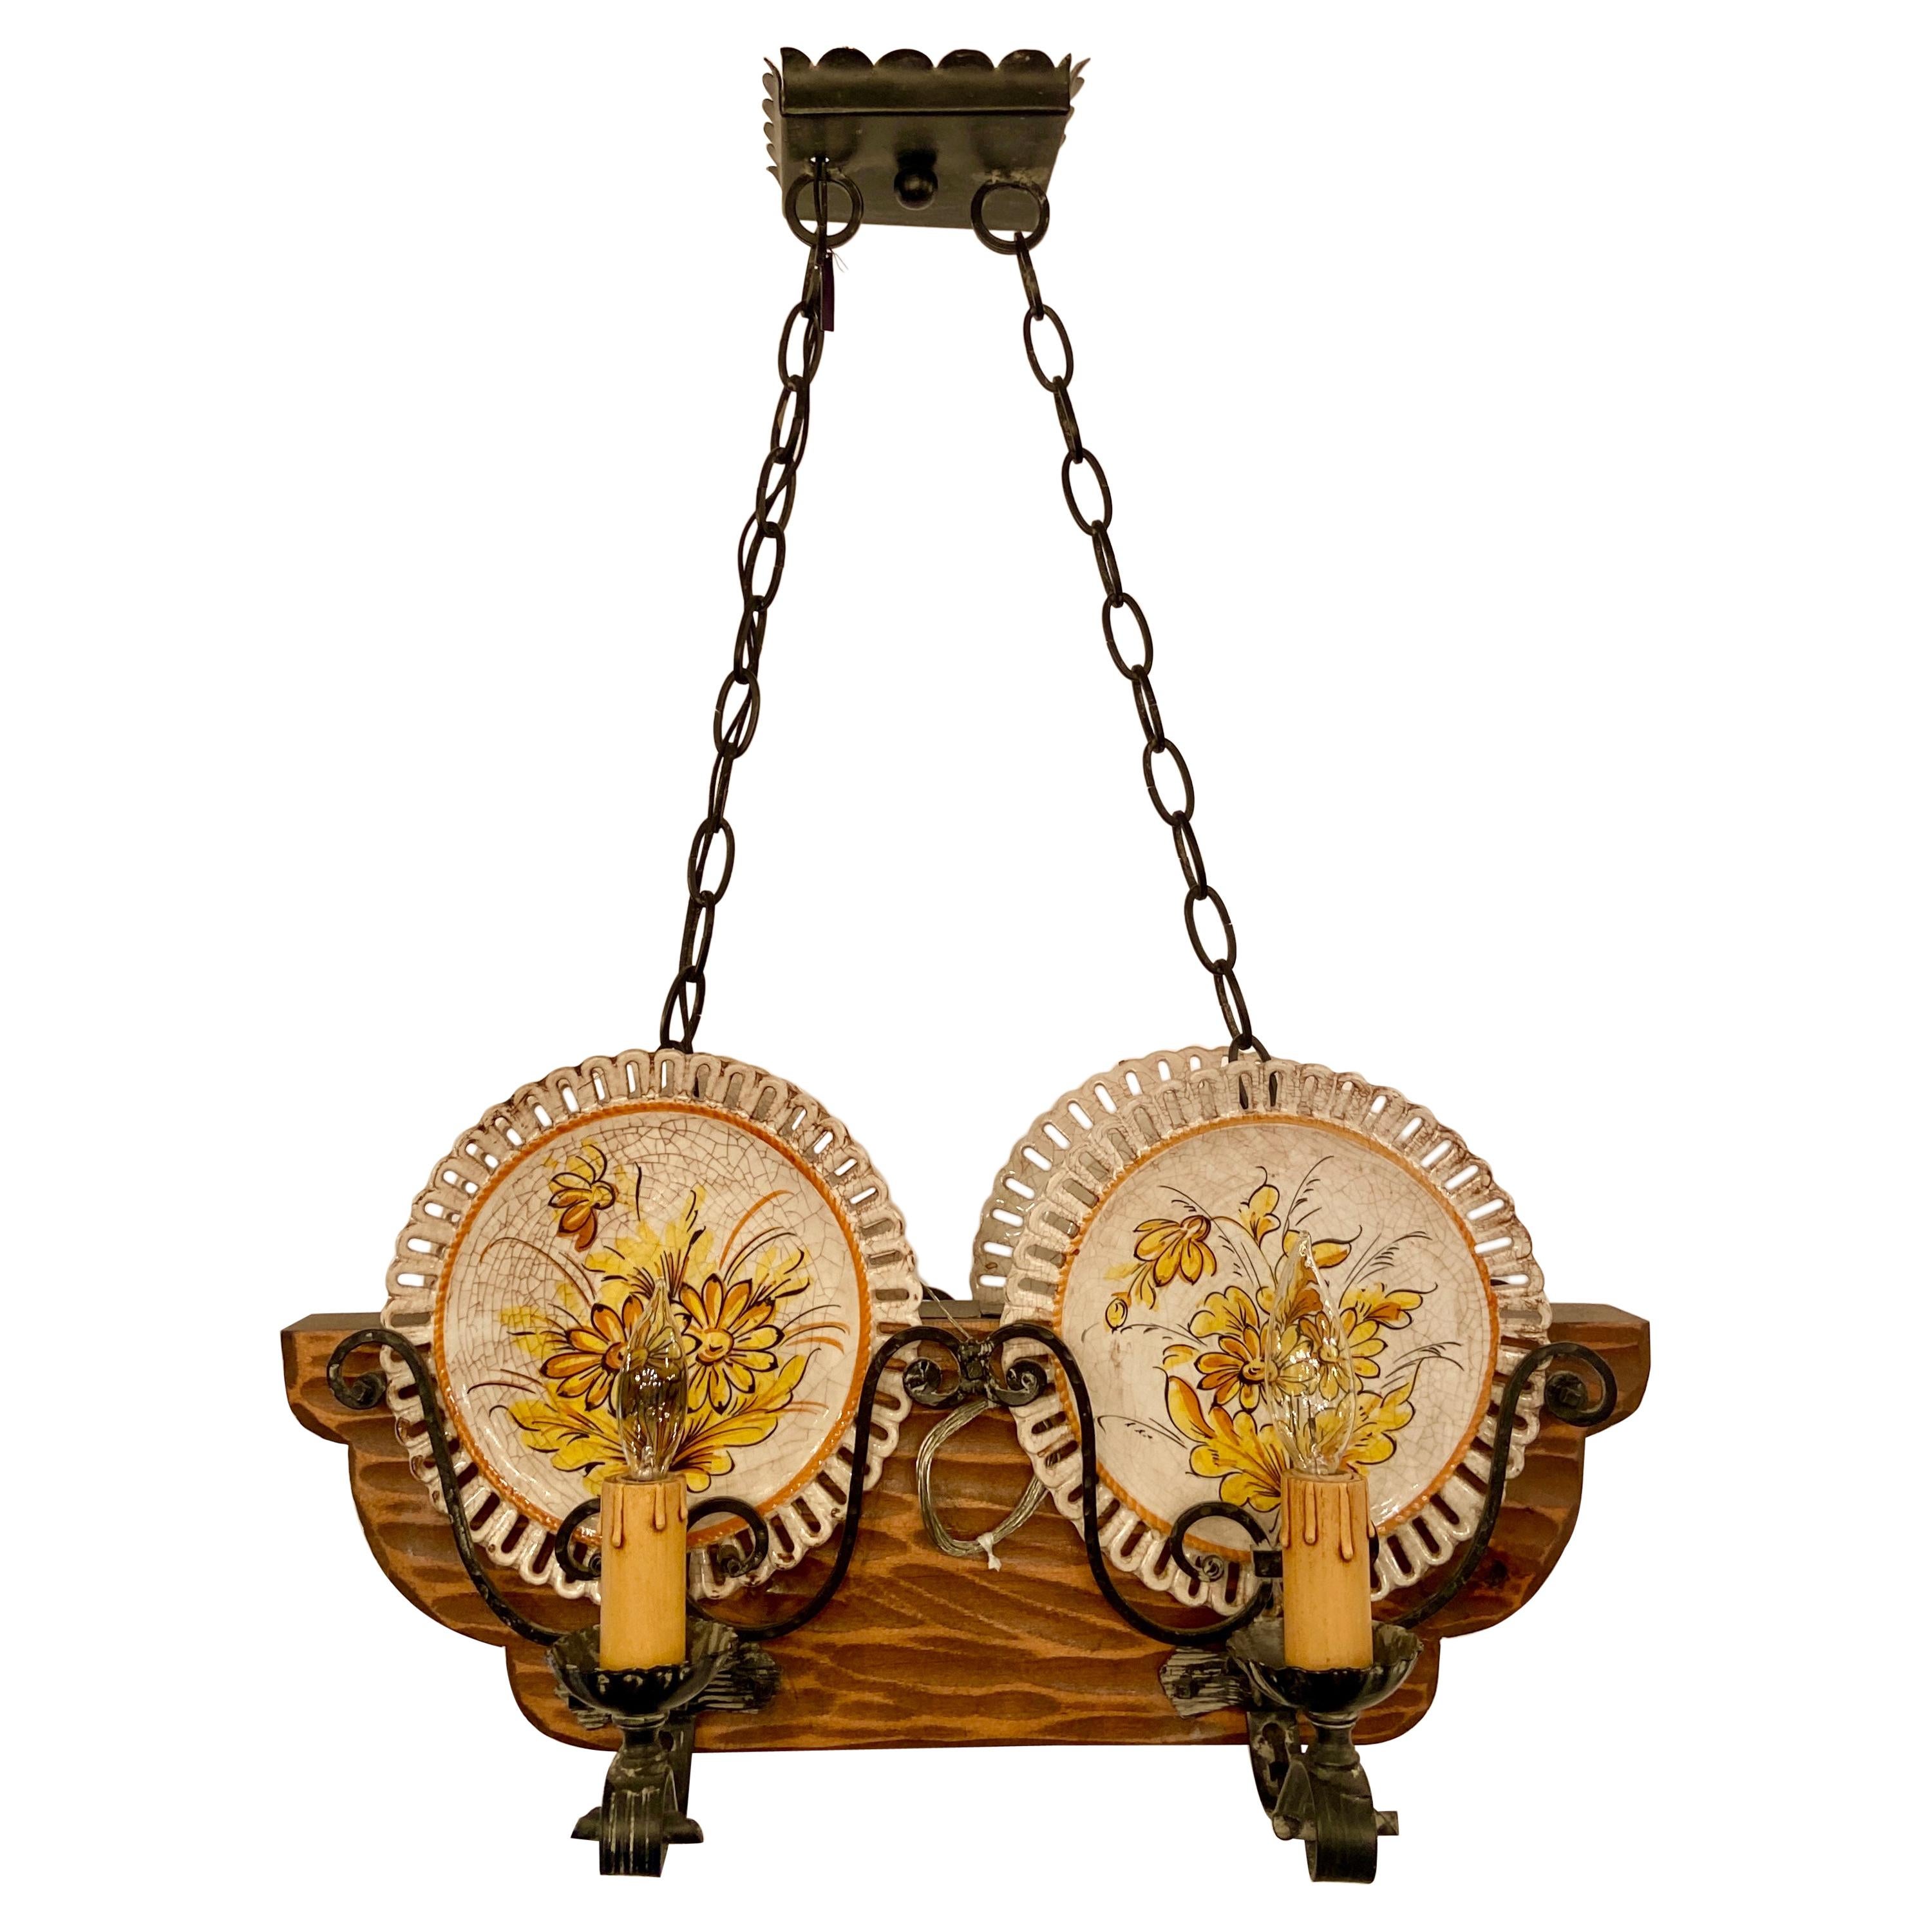 Hand-Made Wrought Iron and Carved Wood Porcelain Plate-Holder Chandelier